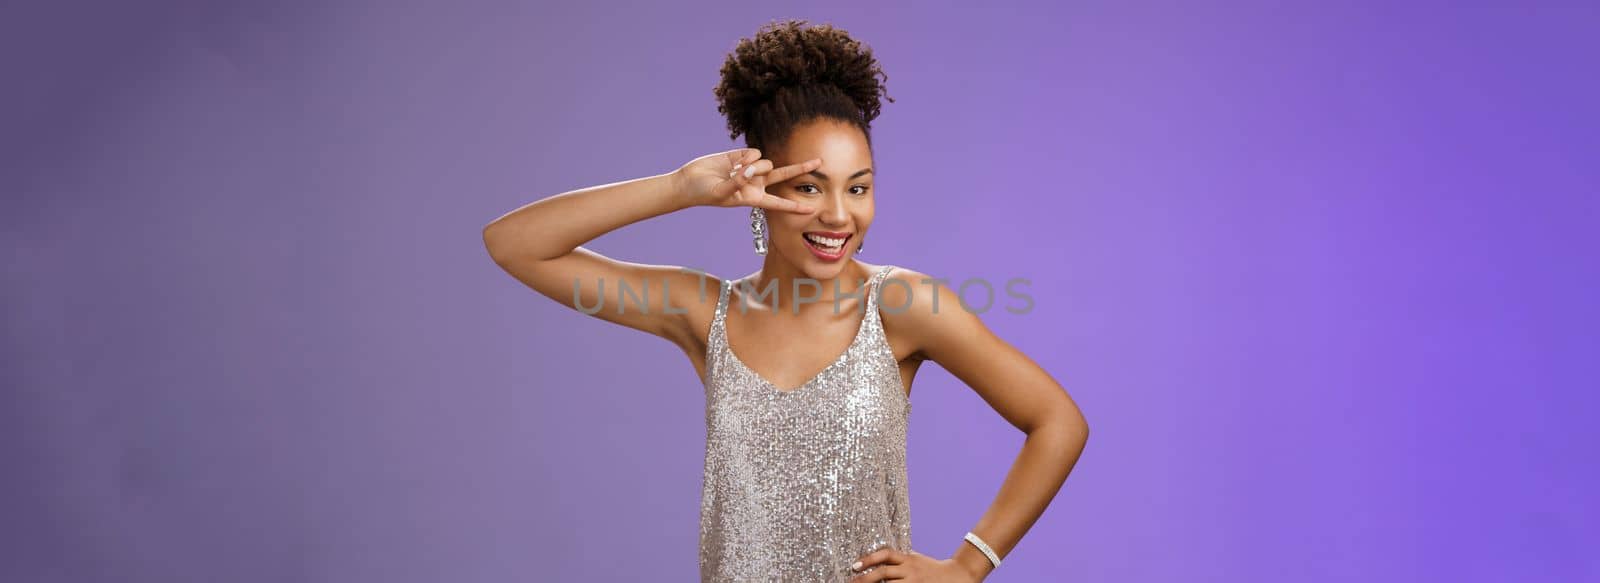 Joyful charming african-american woman in silver shiny evening dress smiling lively entertained grinning show victory peace gesture hold hand waist enjoying awesome party, blue background.